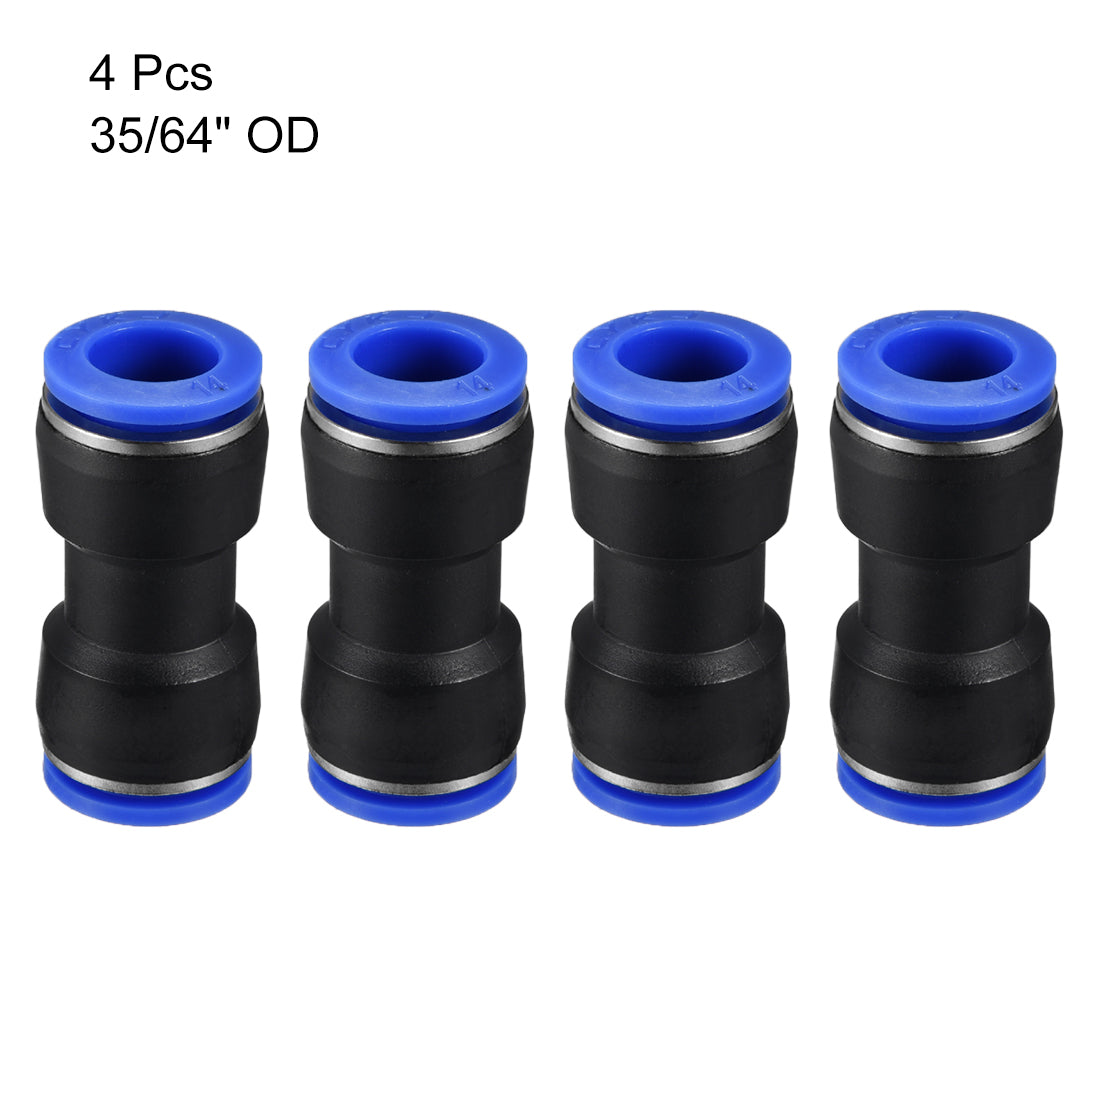 uxcell Uxcell Push to Connect Fittings Tube Connect  14mm or 35/64" Straight OD Push Fit Fittings Tube Fittings Push Lock Blue 4pcs